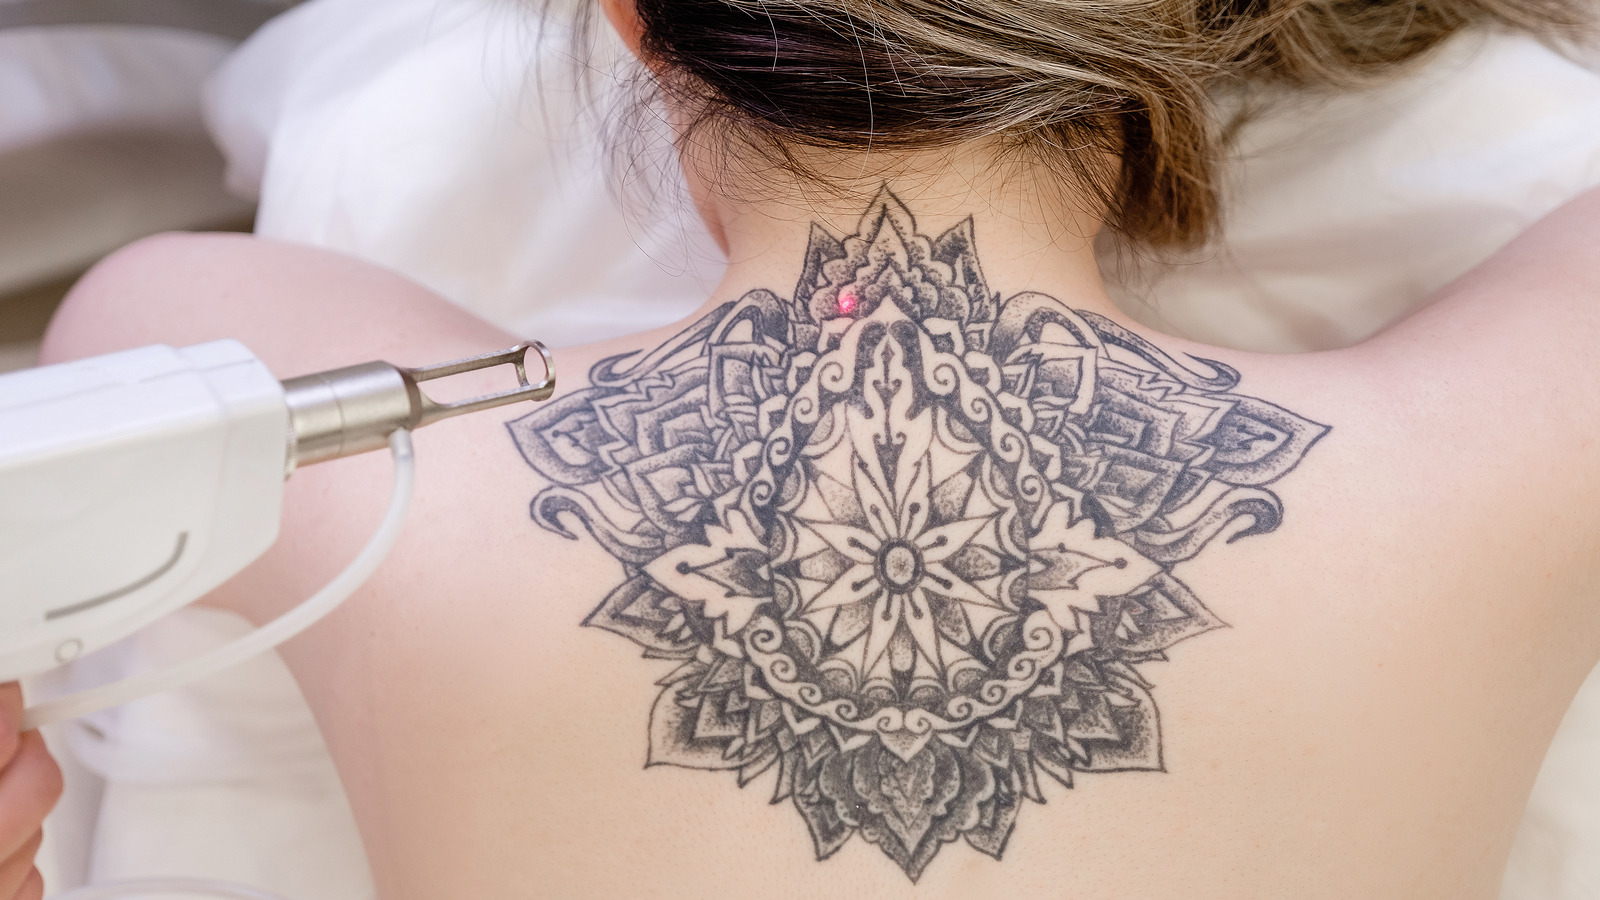 Soul Tattoos Are More Than Just a Body Ink Trend